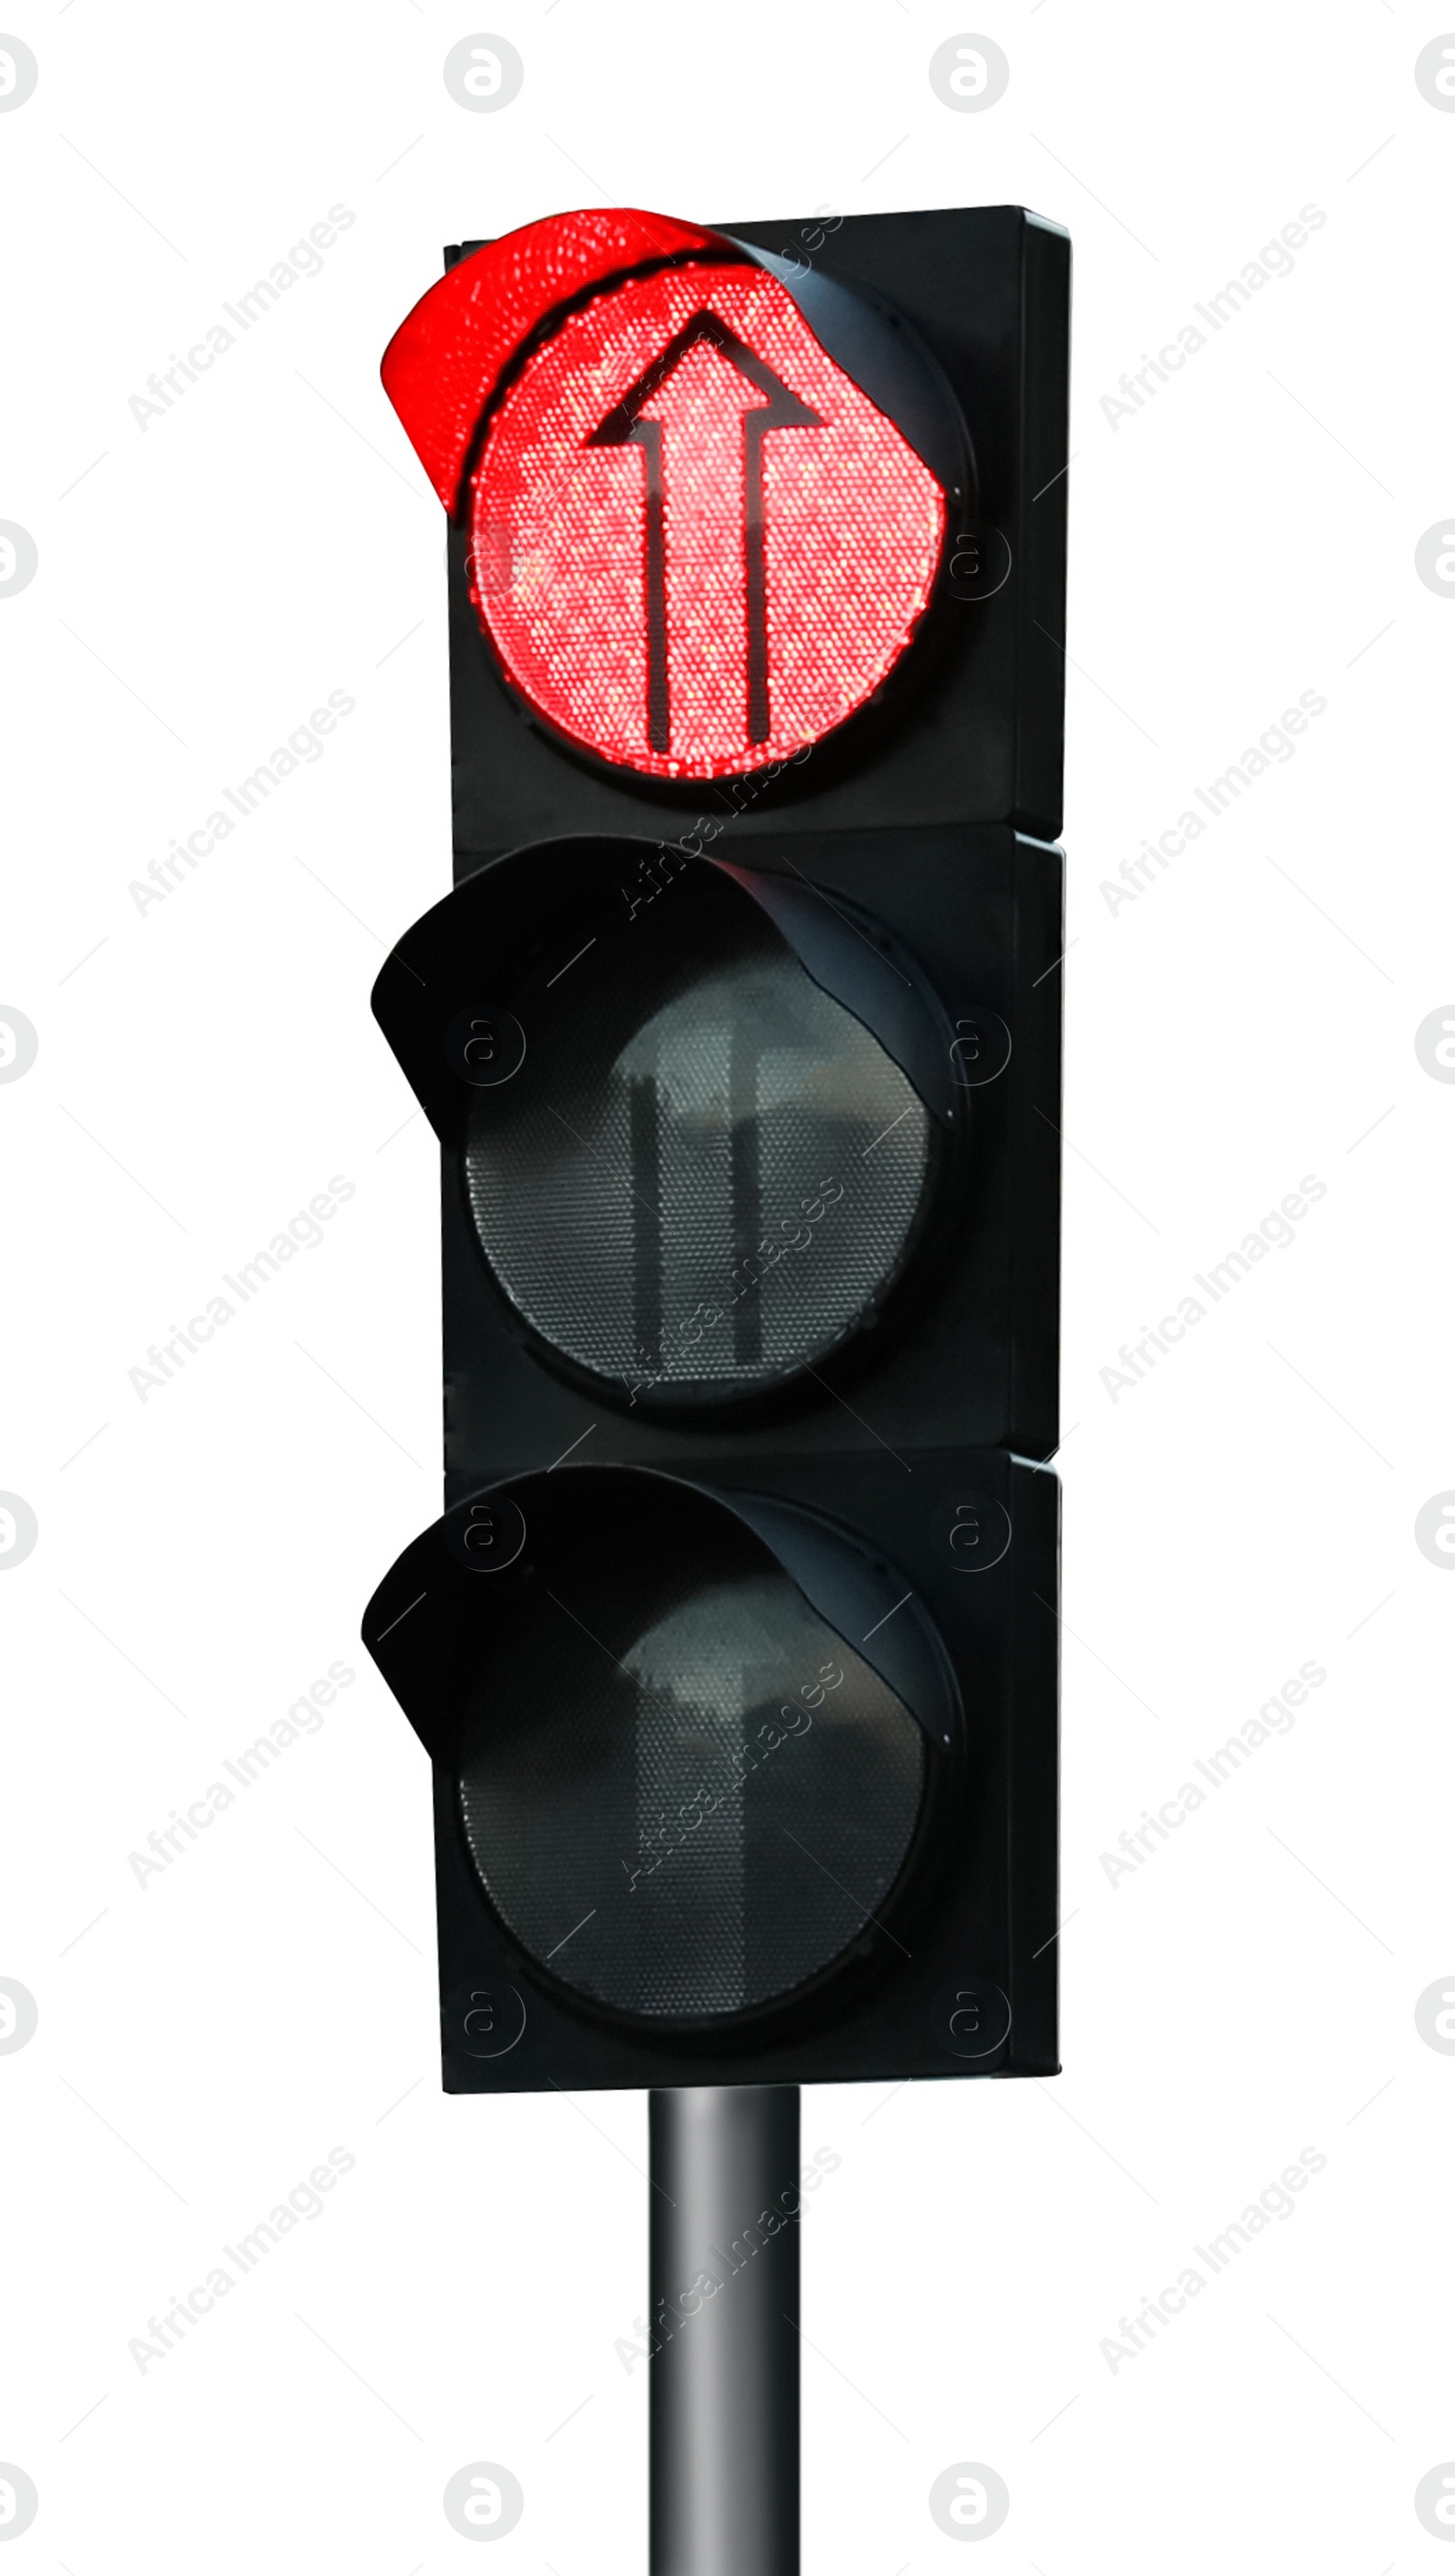 Image of Modern traffic light with arrows isolated on white